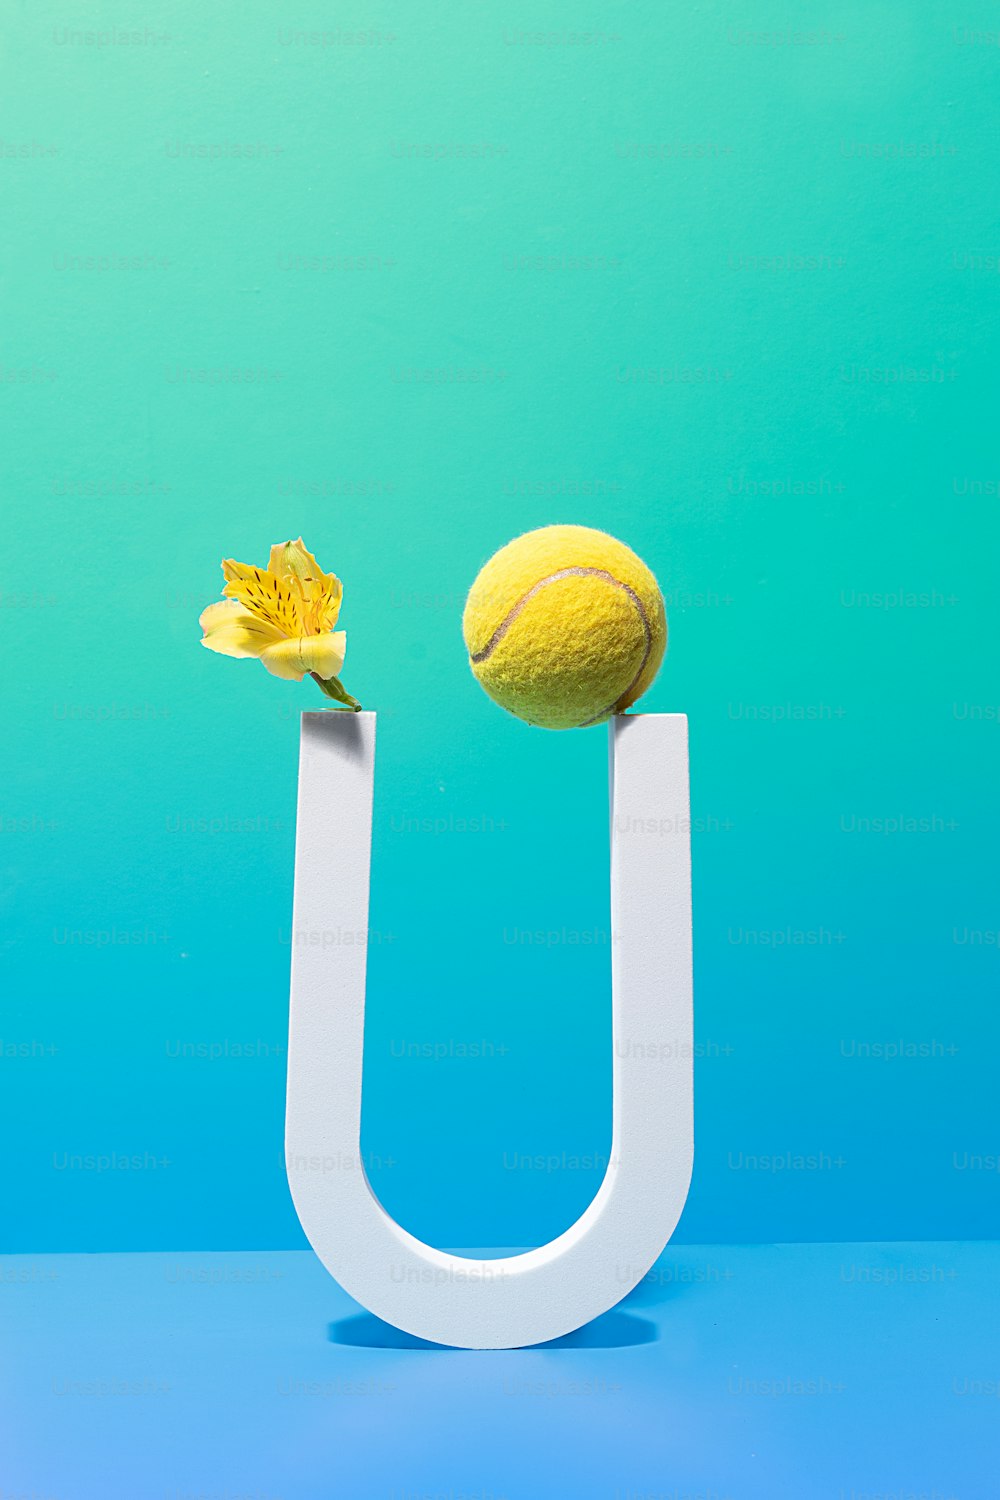 a tennis ball and a flower on a letter u